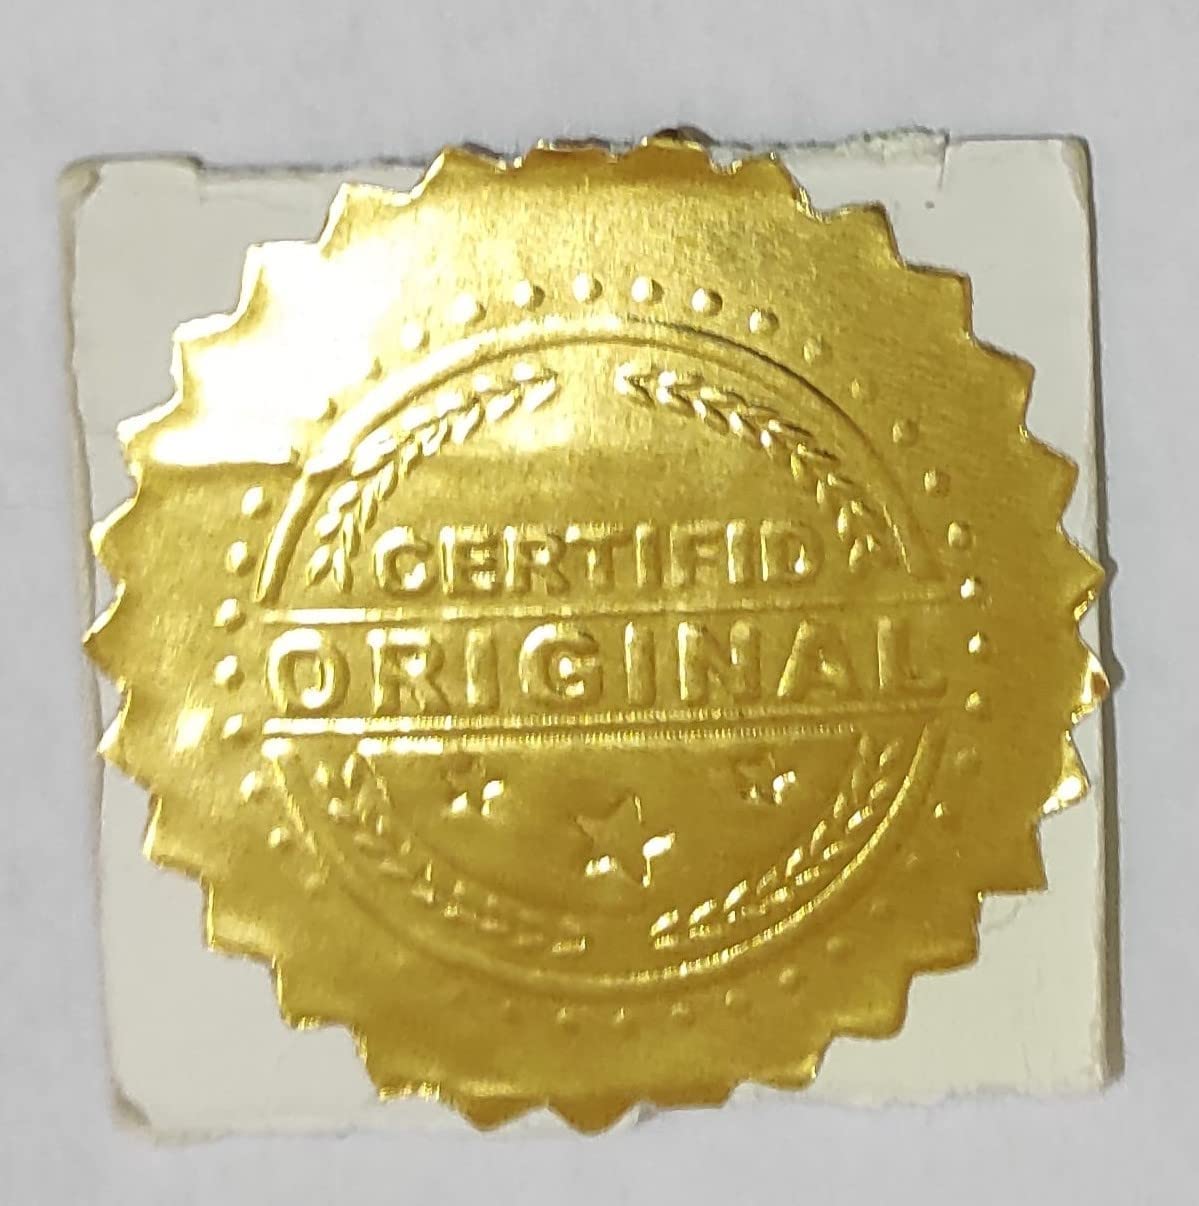 A gold circular cover sticker with the word “Original” stamped on it